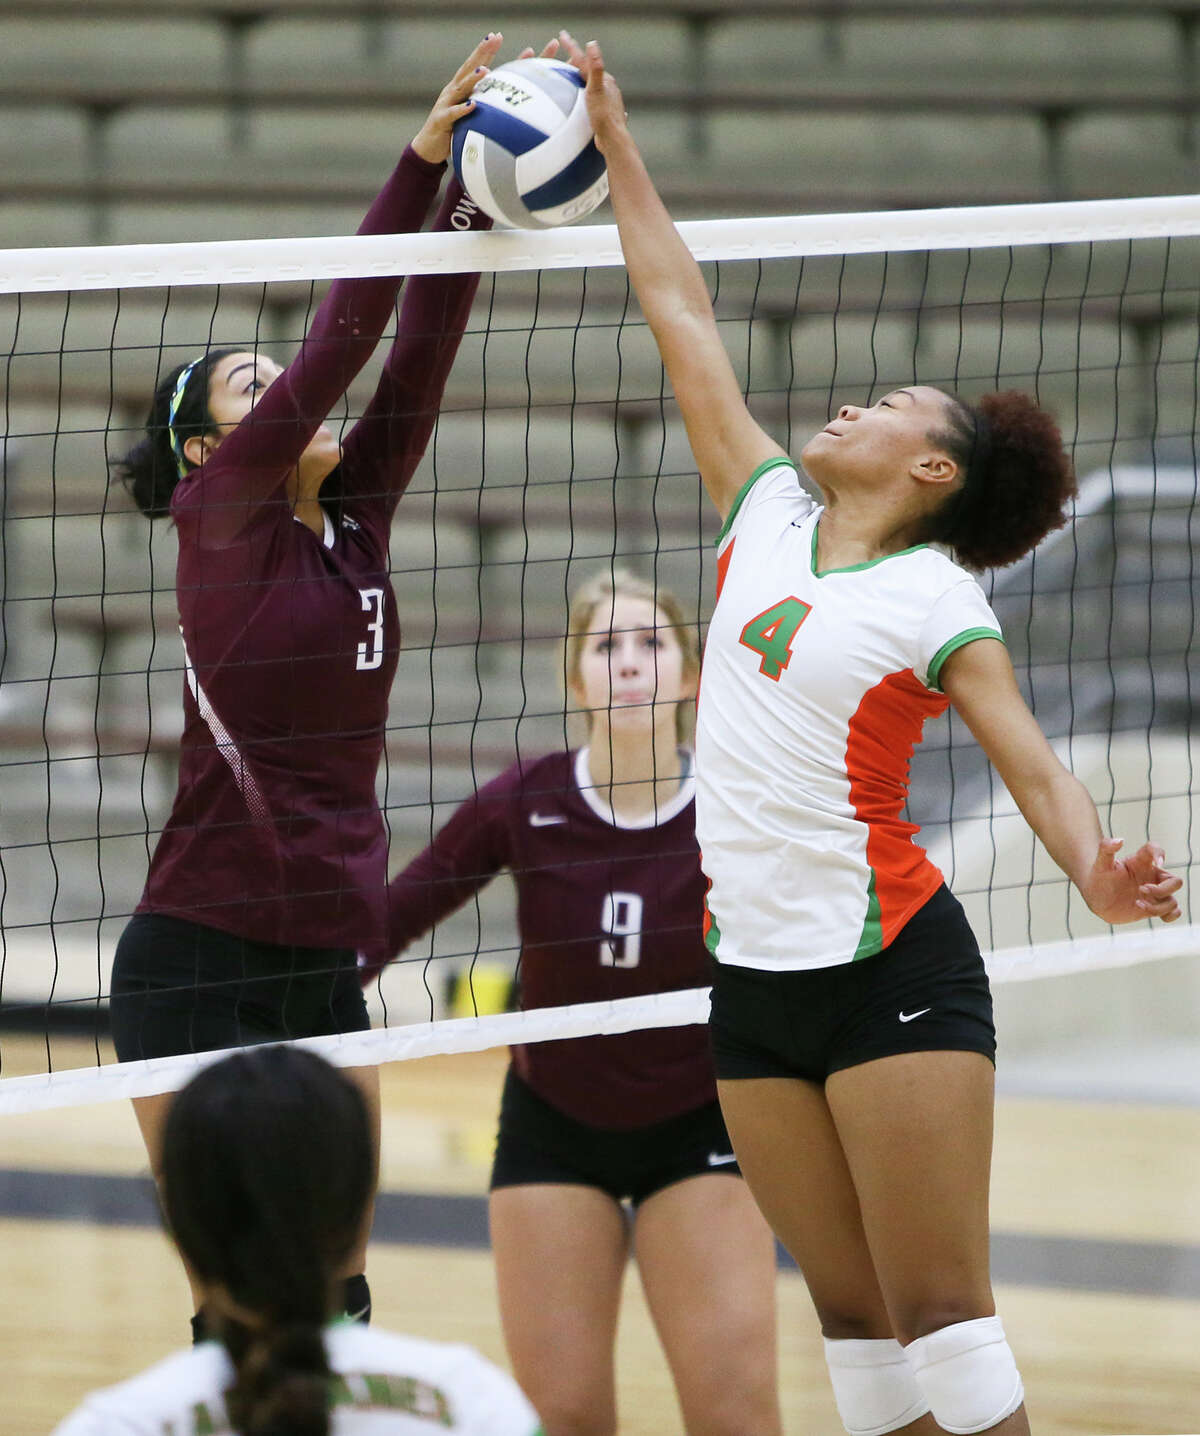 Highlands' Jenelle Rodriguez (left) blocks a shot at the net by Sam Houston's Rita Davis during their match at Alamo Convocation Center on Wednesday, Oct. 14, 2015. Highlands beat Sam Houston in 4 games: 21-25, 25-14, 25-23, 25-13. MARVIN PFEIFFER/ mpfeiffer@express-news.net